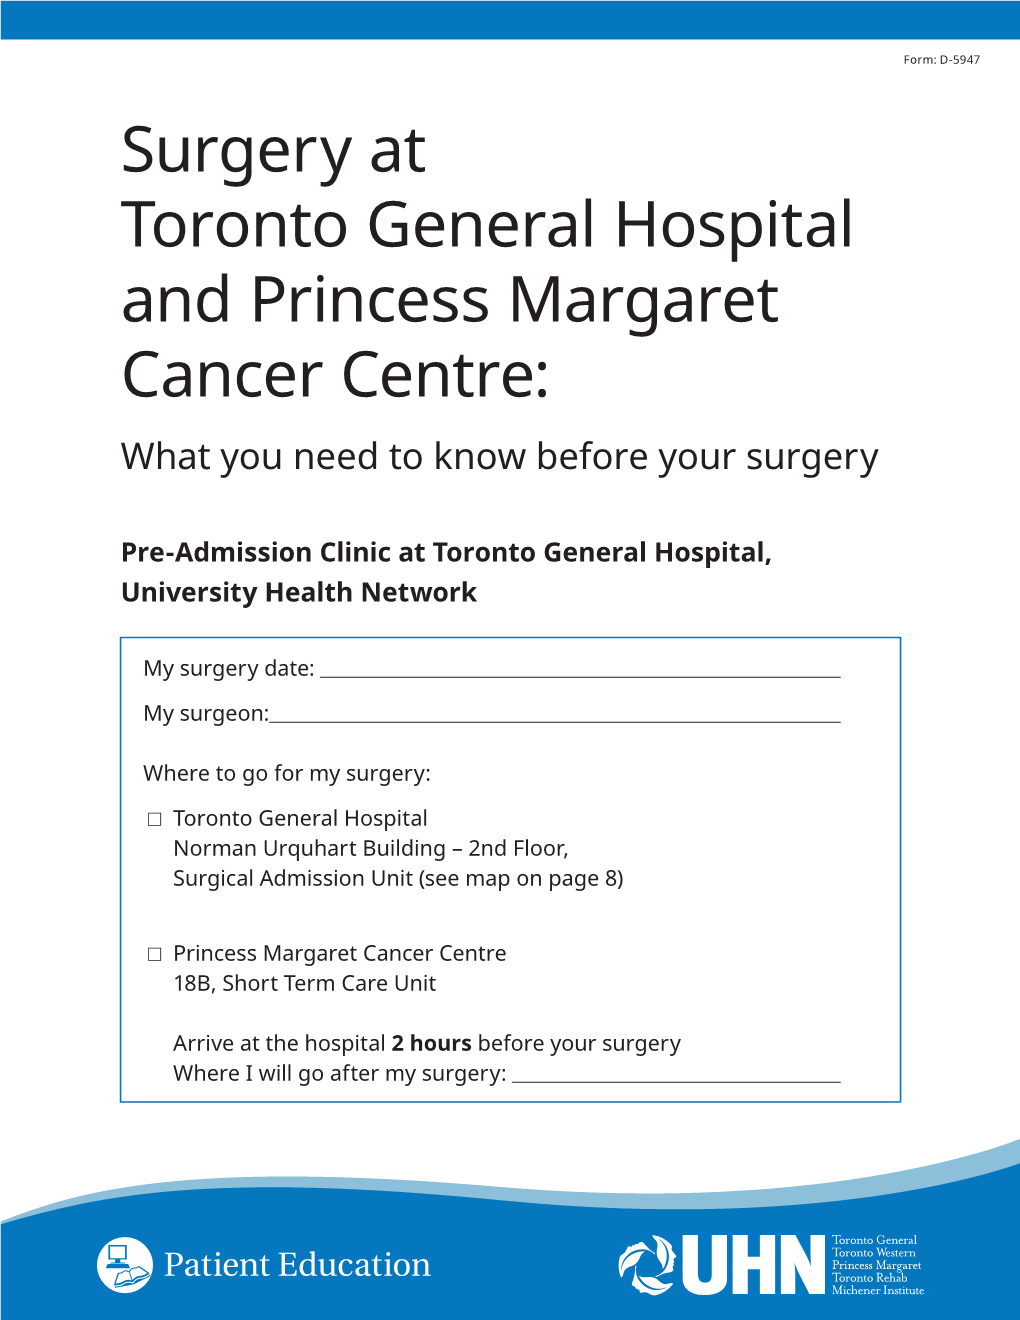 Surgery at Toronto General Hospital and Princess Margaret Cancer Centre: What You Need to Know Before Your Surgery